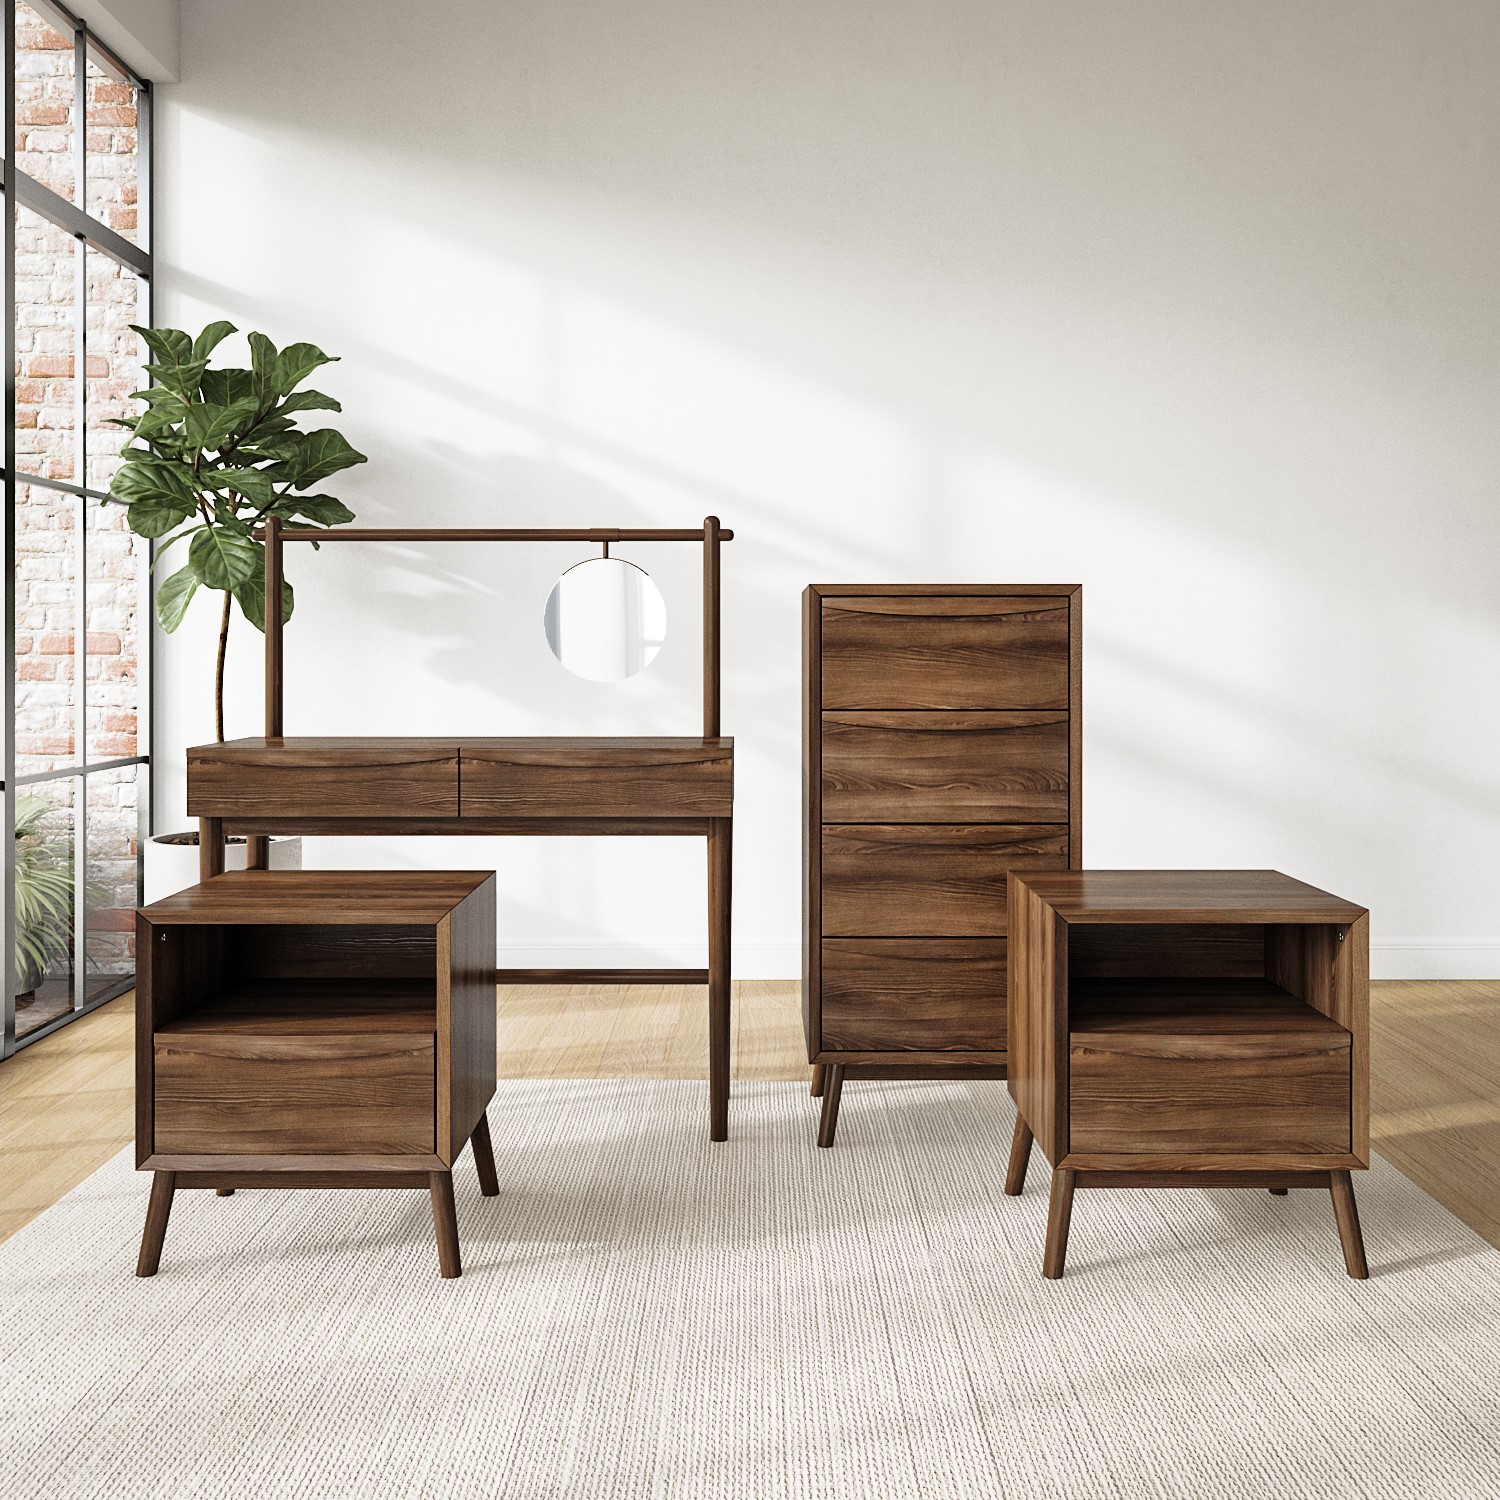 Photo of Walnut 4 piece bedroom furniture set with dressing table - frances